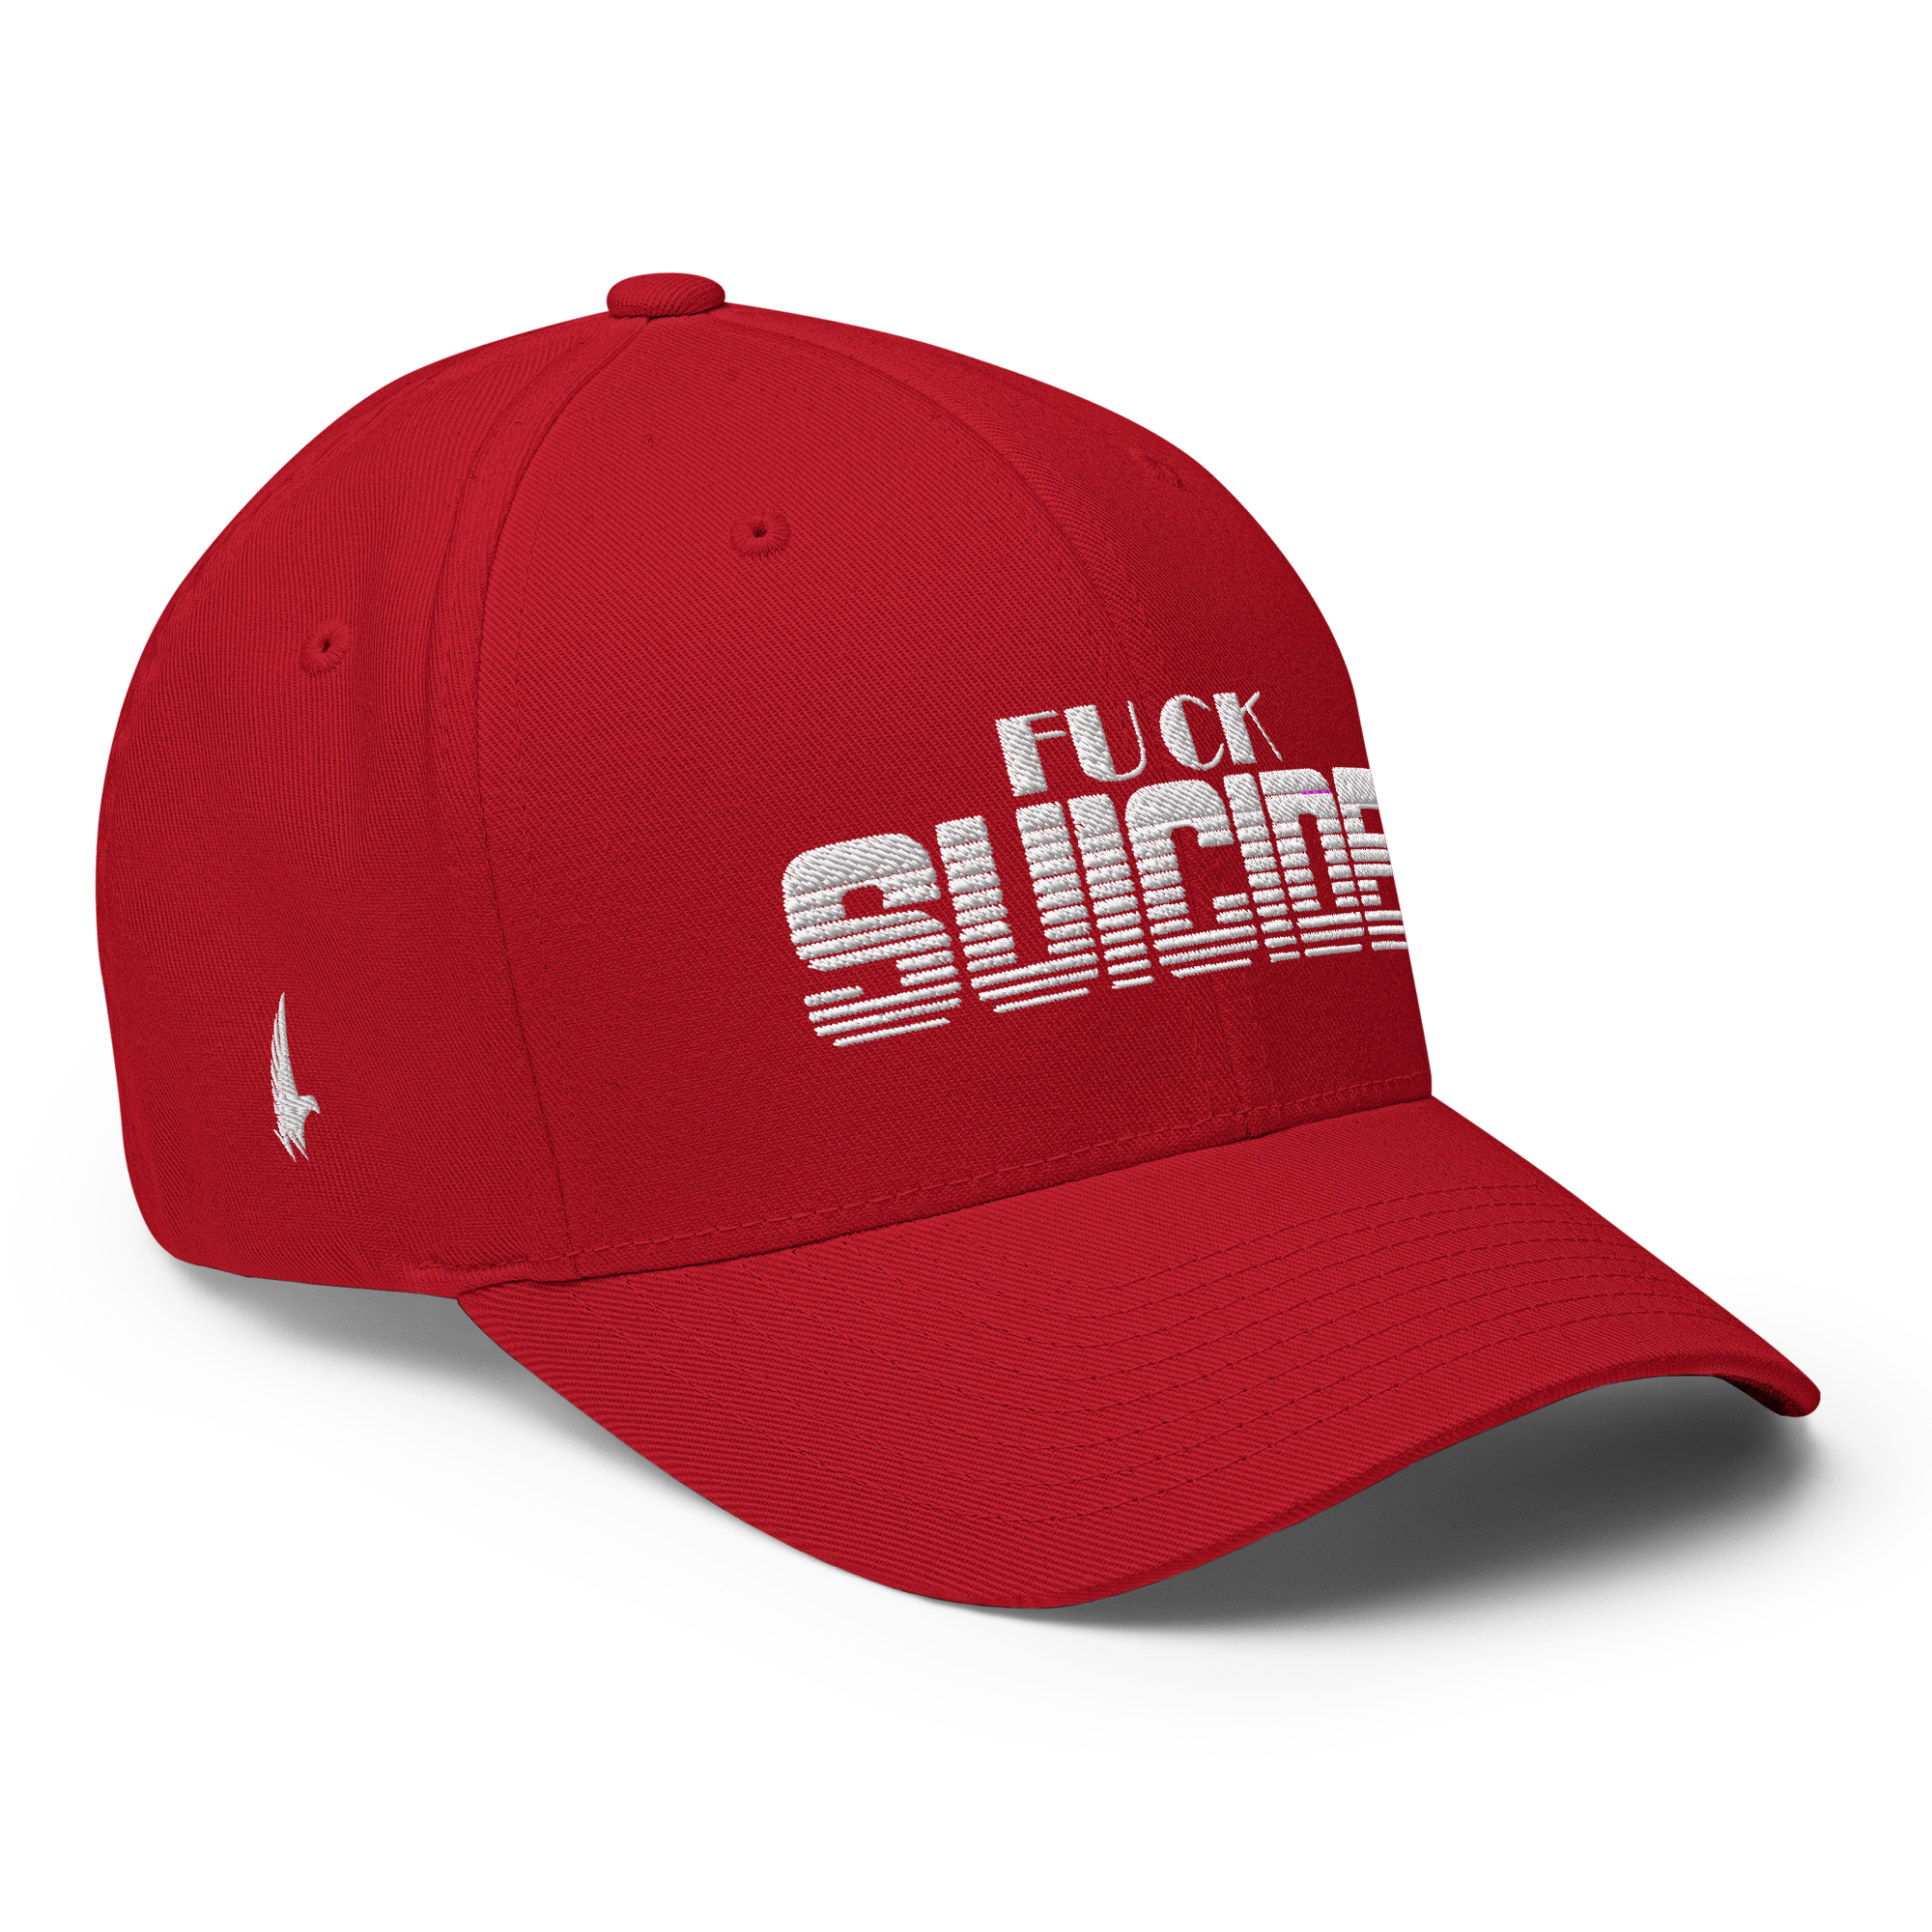 Fk Suicide Fitted Hat Red Fitted - Loyalty Vibes